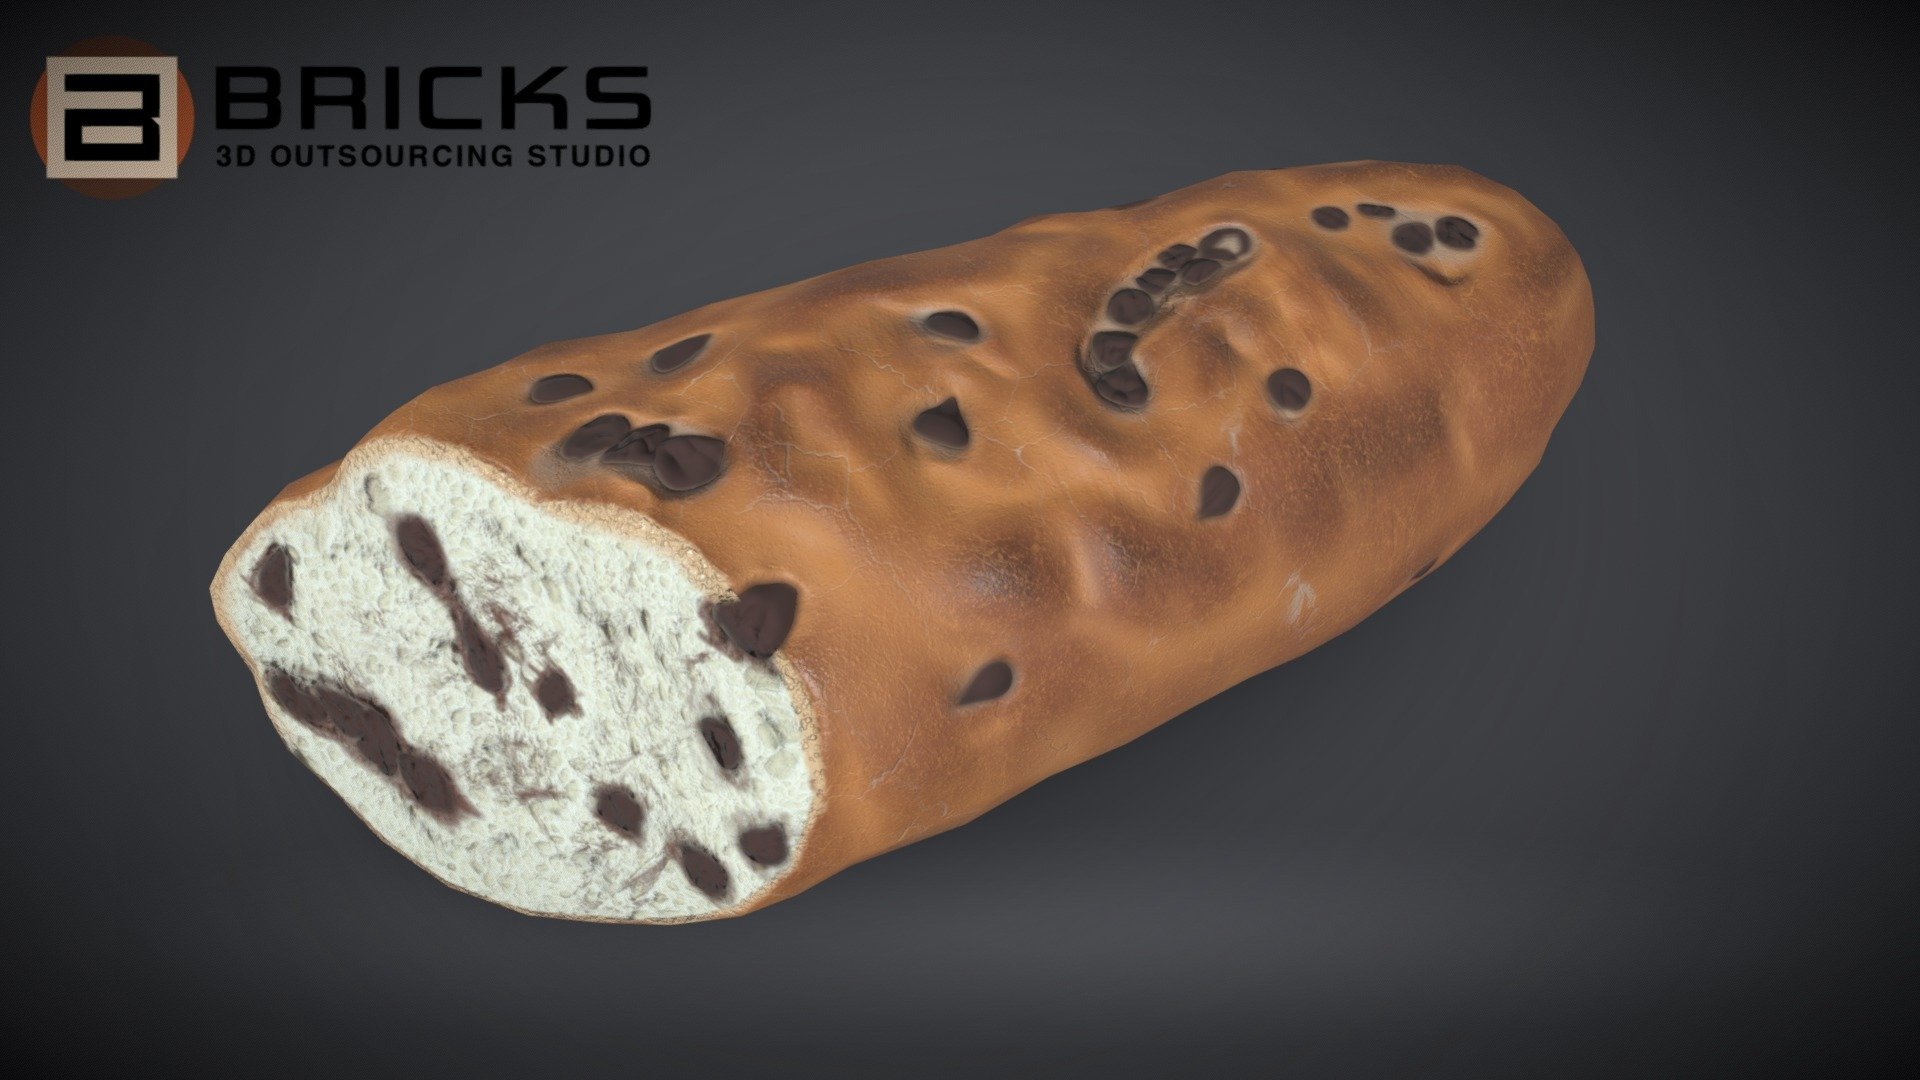 PBR Food Asset:
ChocolateBread
Polycount: 1014
Vertex count: 509
Texture Size: 2048px x 2048px
Normal: OpenGL

If you need any adjust in file please contact us: team@bricks3dstudio.com

Hire us: tringuyen@bricks3dstudio.com
Here is us: https://www.bricks3dstudio.com/
        https://www.artstation.com/bricksstudio
        https://www.facebook.com/Bricks3dstudio/
        https://www.linkedin.com/in/bricks-studio-b10462252/ - ChocolateBread - Buy Royalty Free 3D model by Bricks Studio (@bricks3dstudio) 3d model